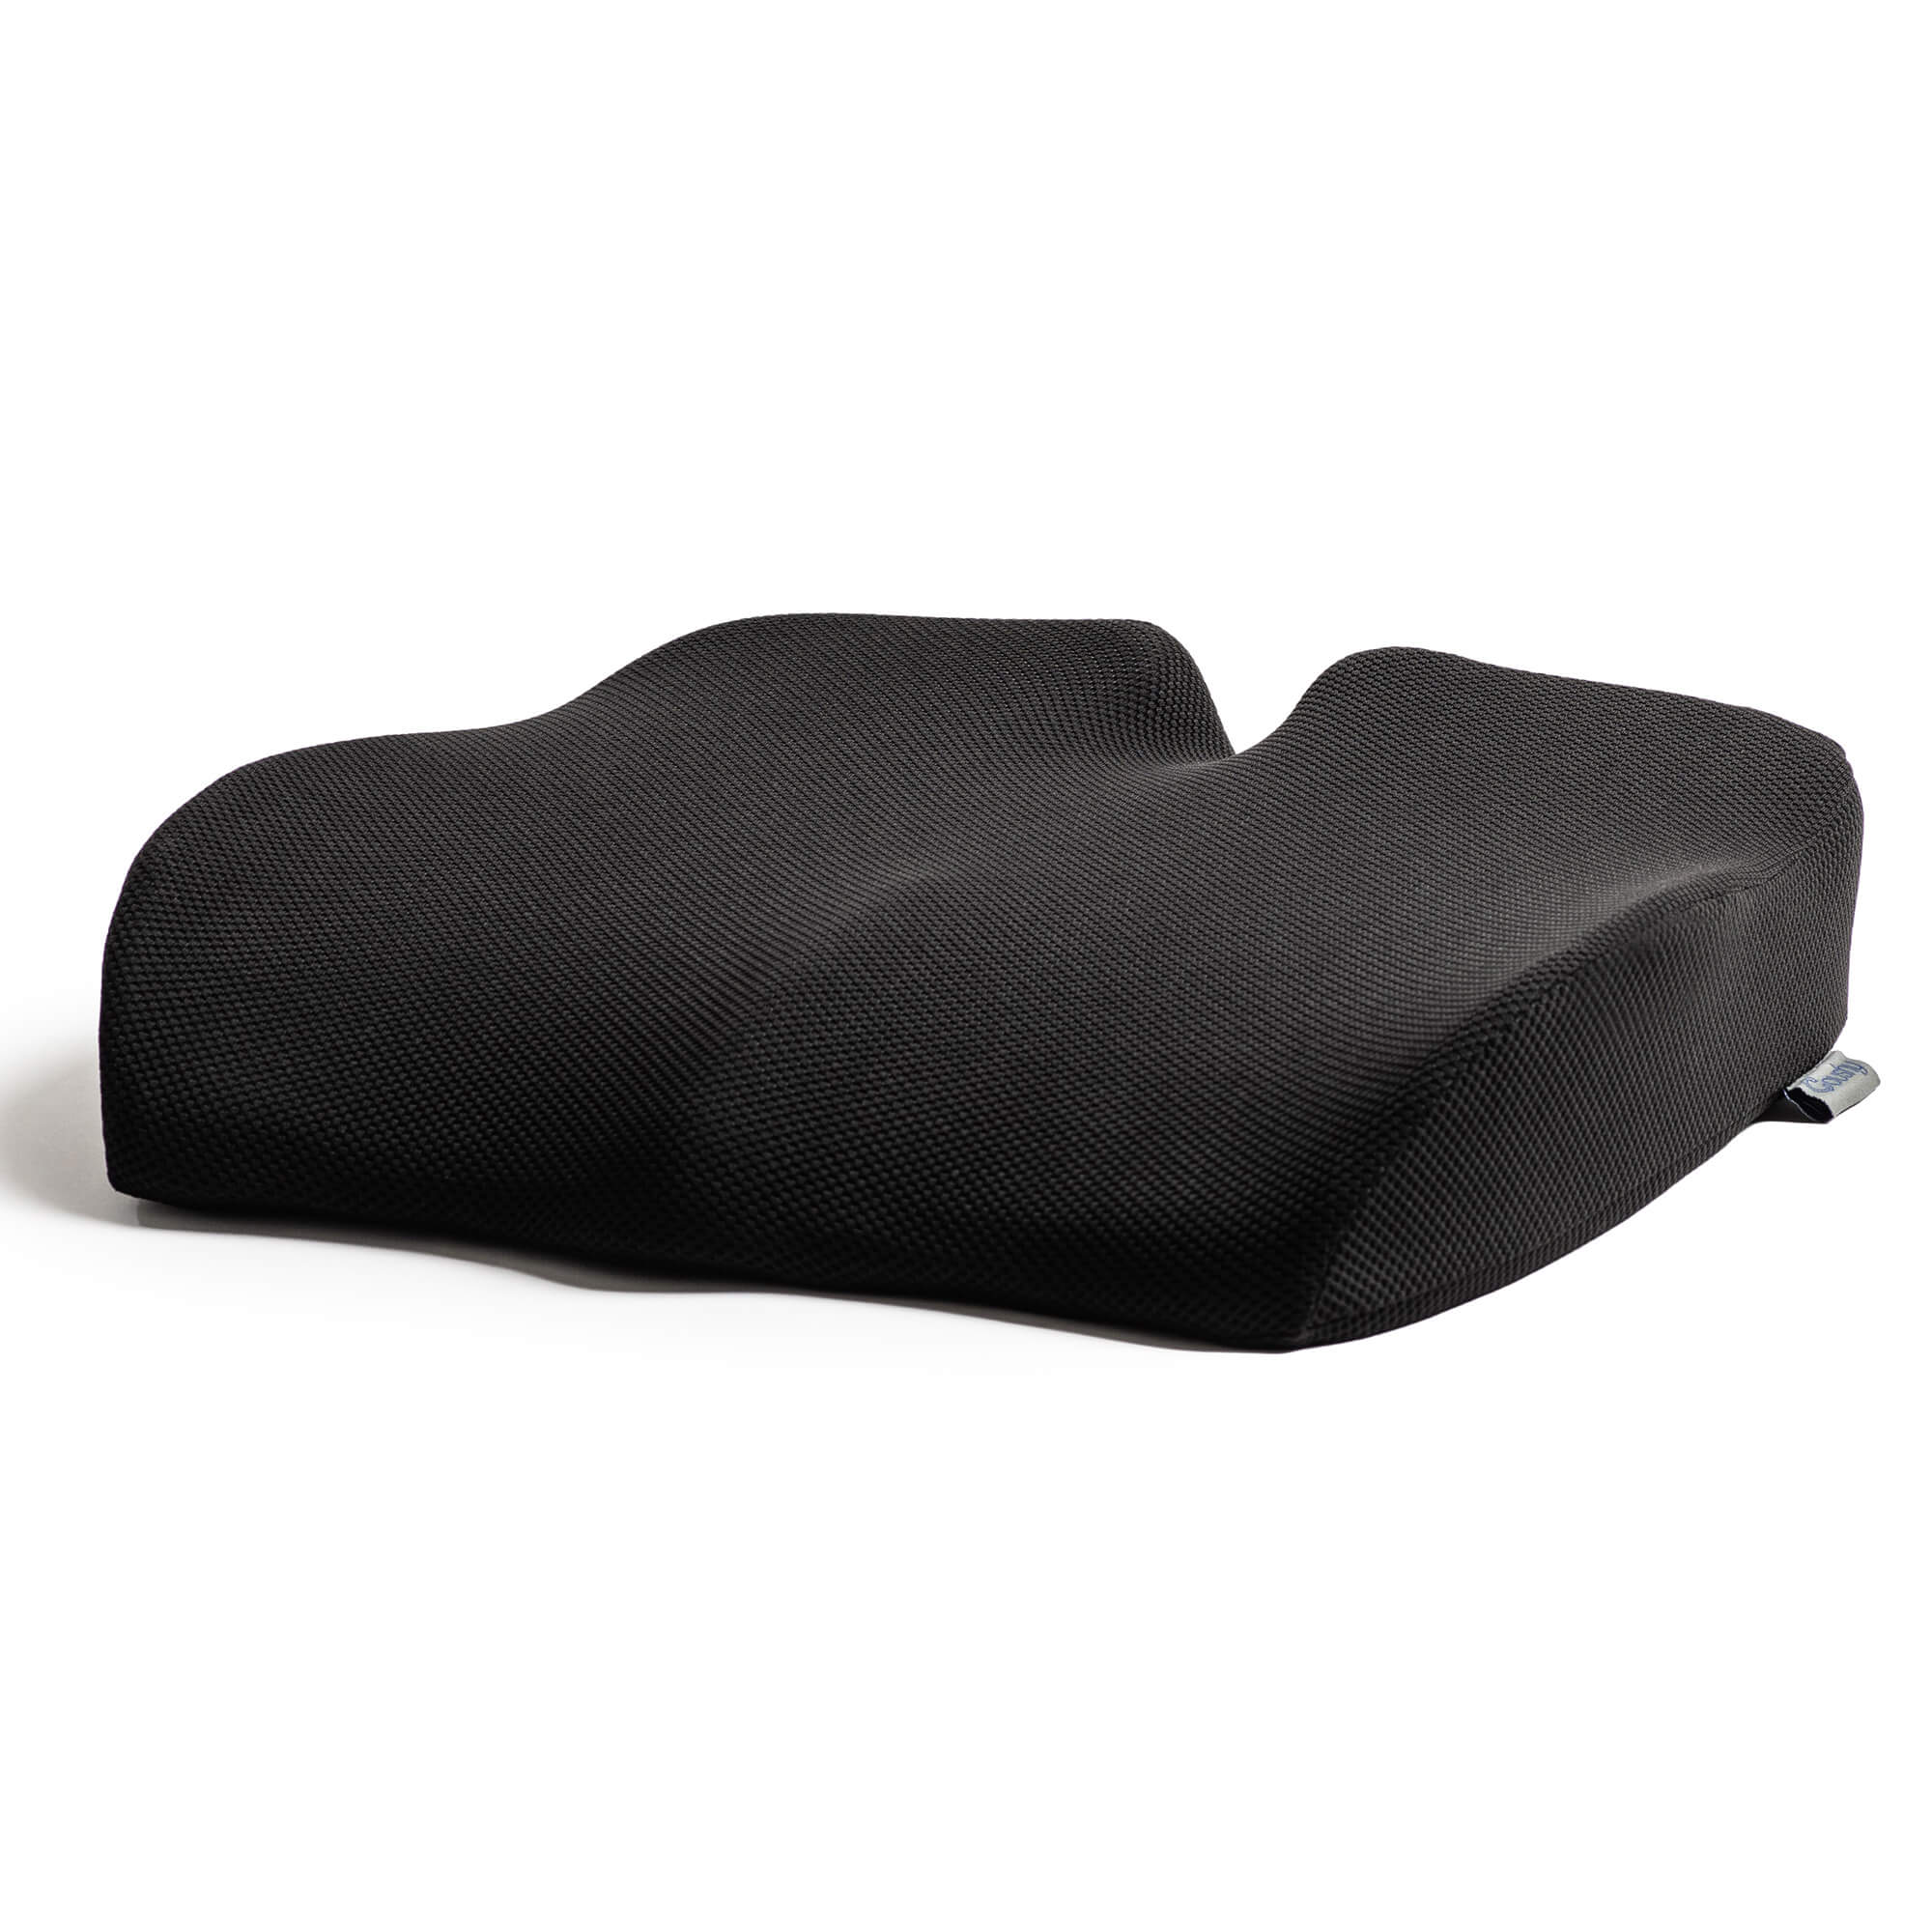 5 Seat Cushions To Relieve Point Of Contact Pressure